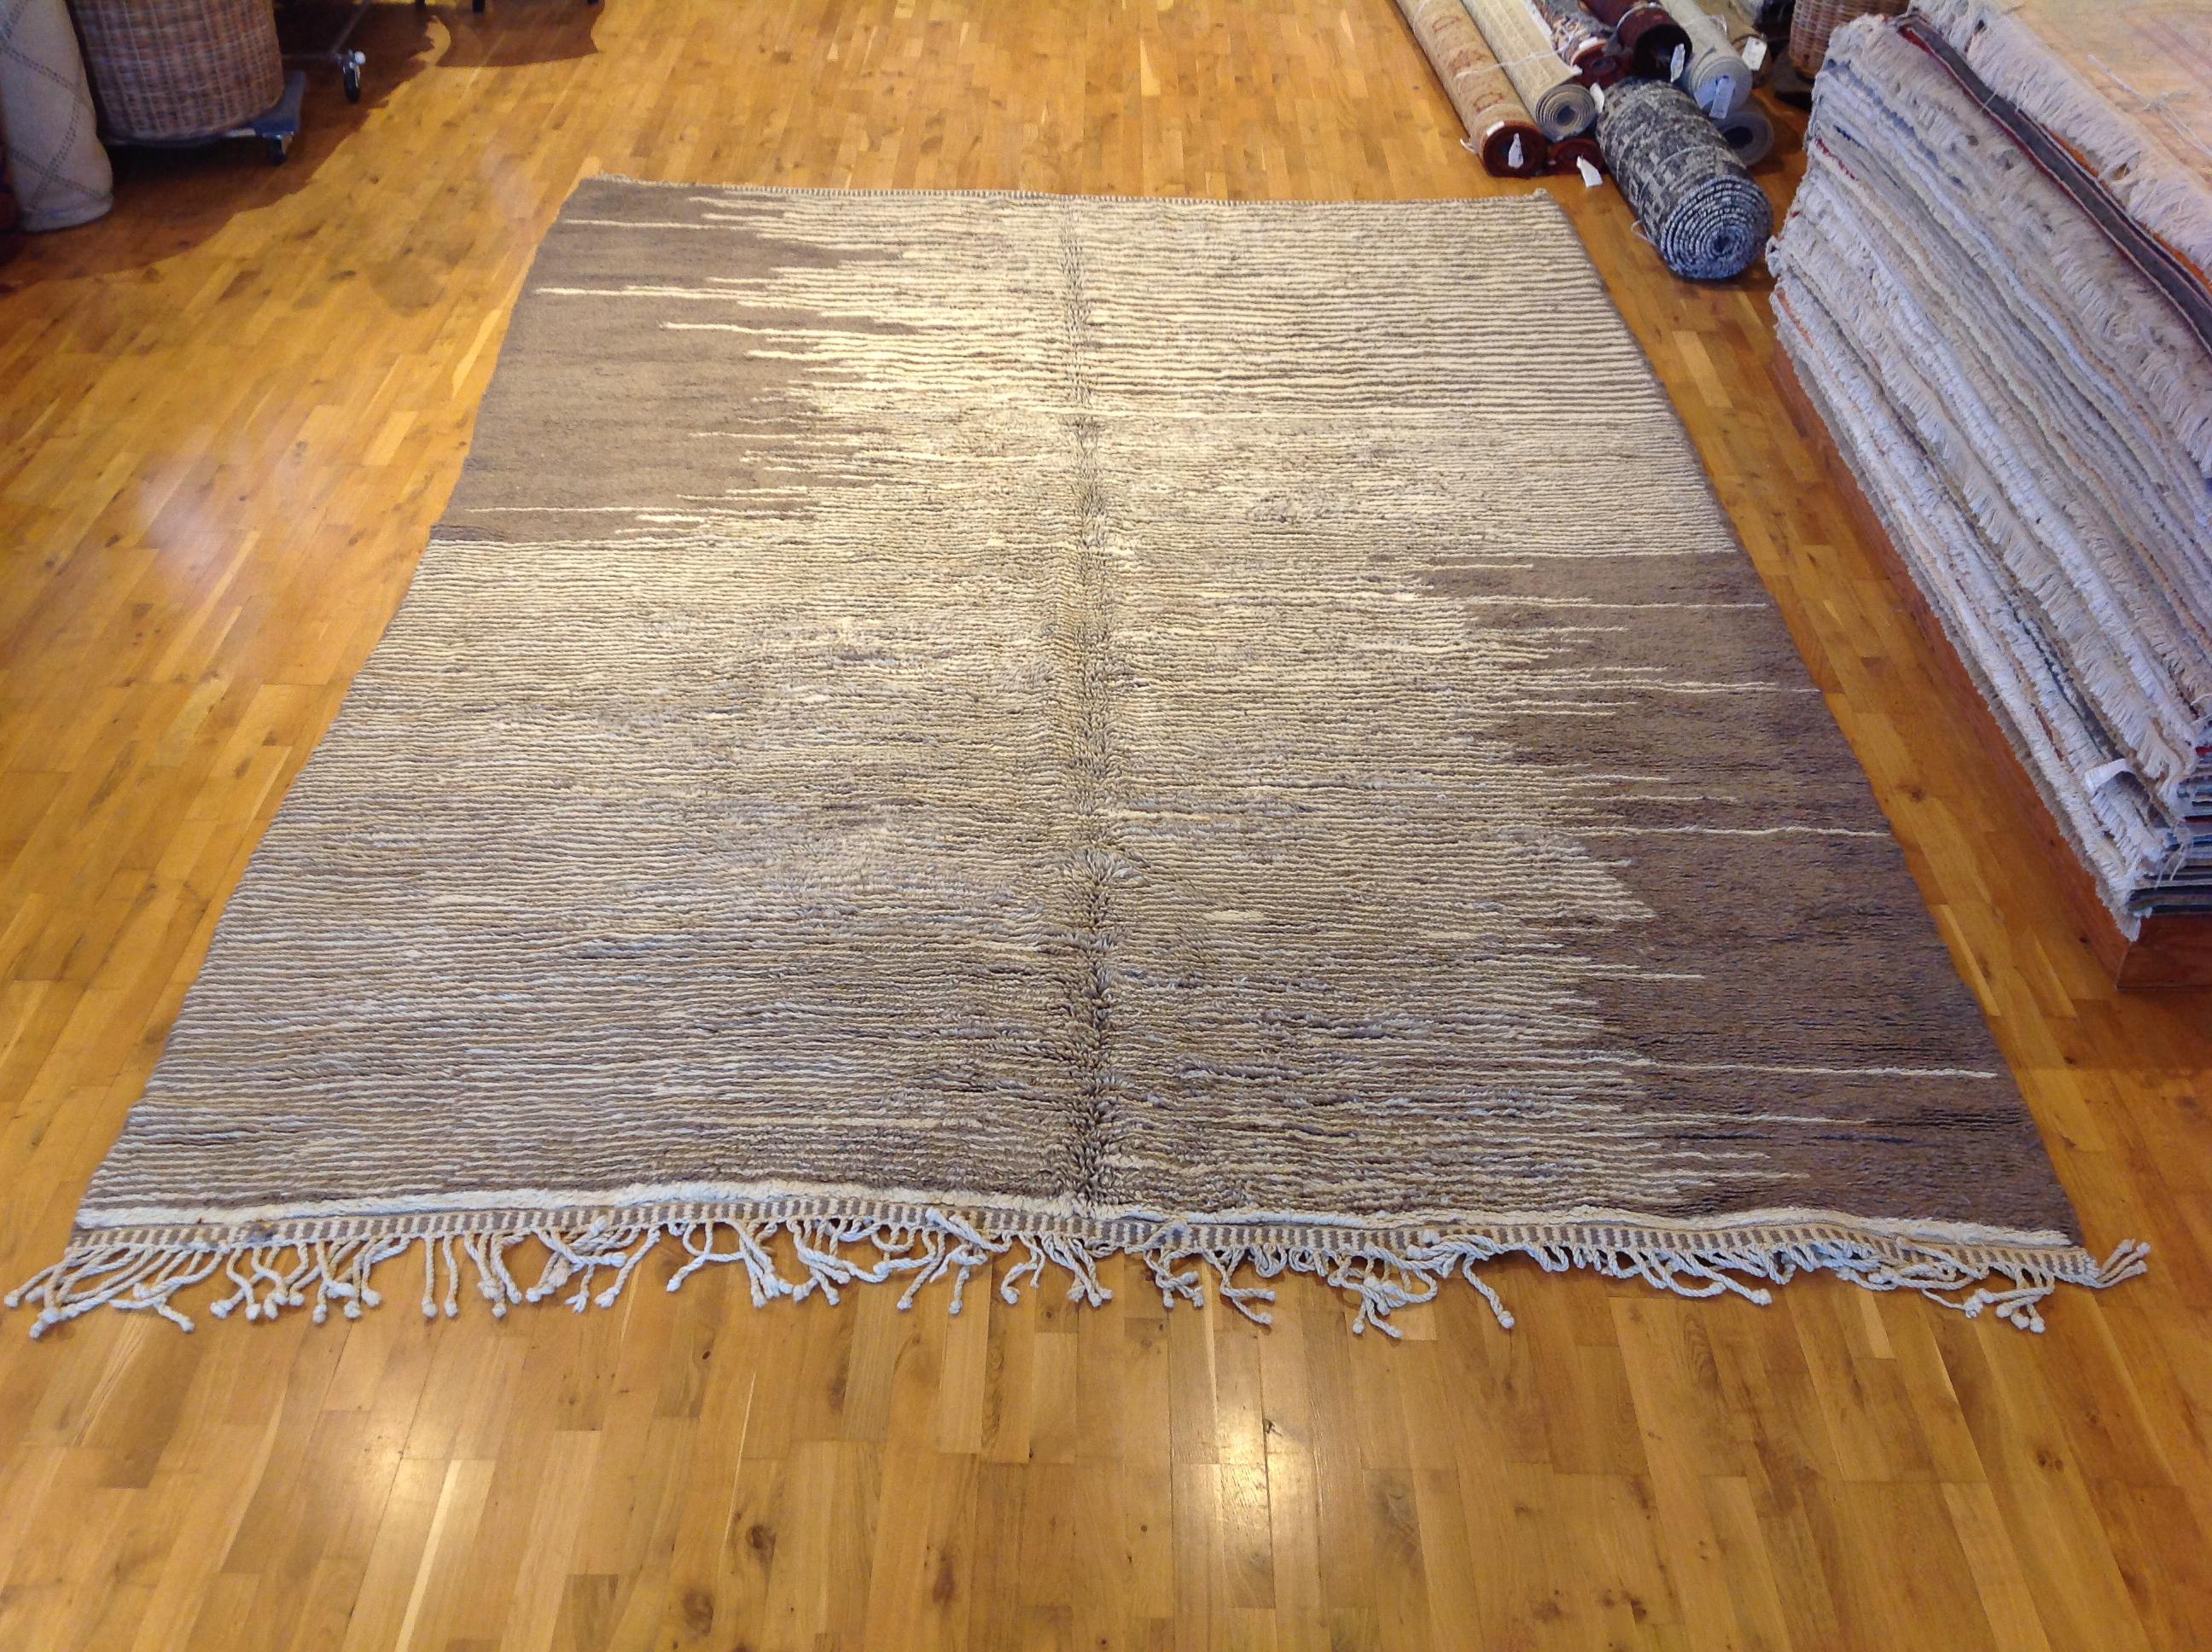 Midcentury inspired look rug to warm up your space. Striated taupy brown across the rug with light ivory accents to give extra depth.